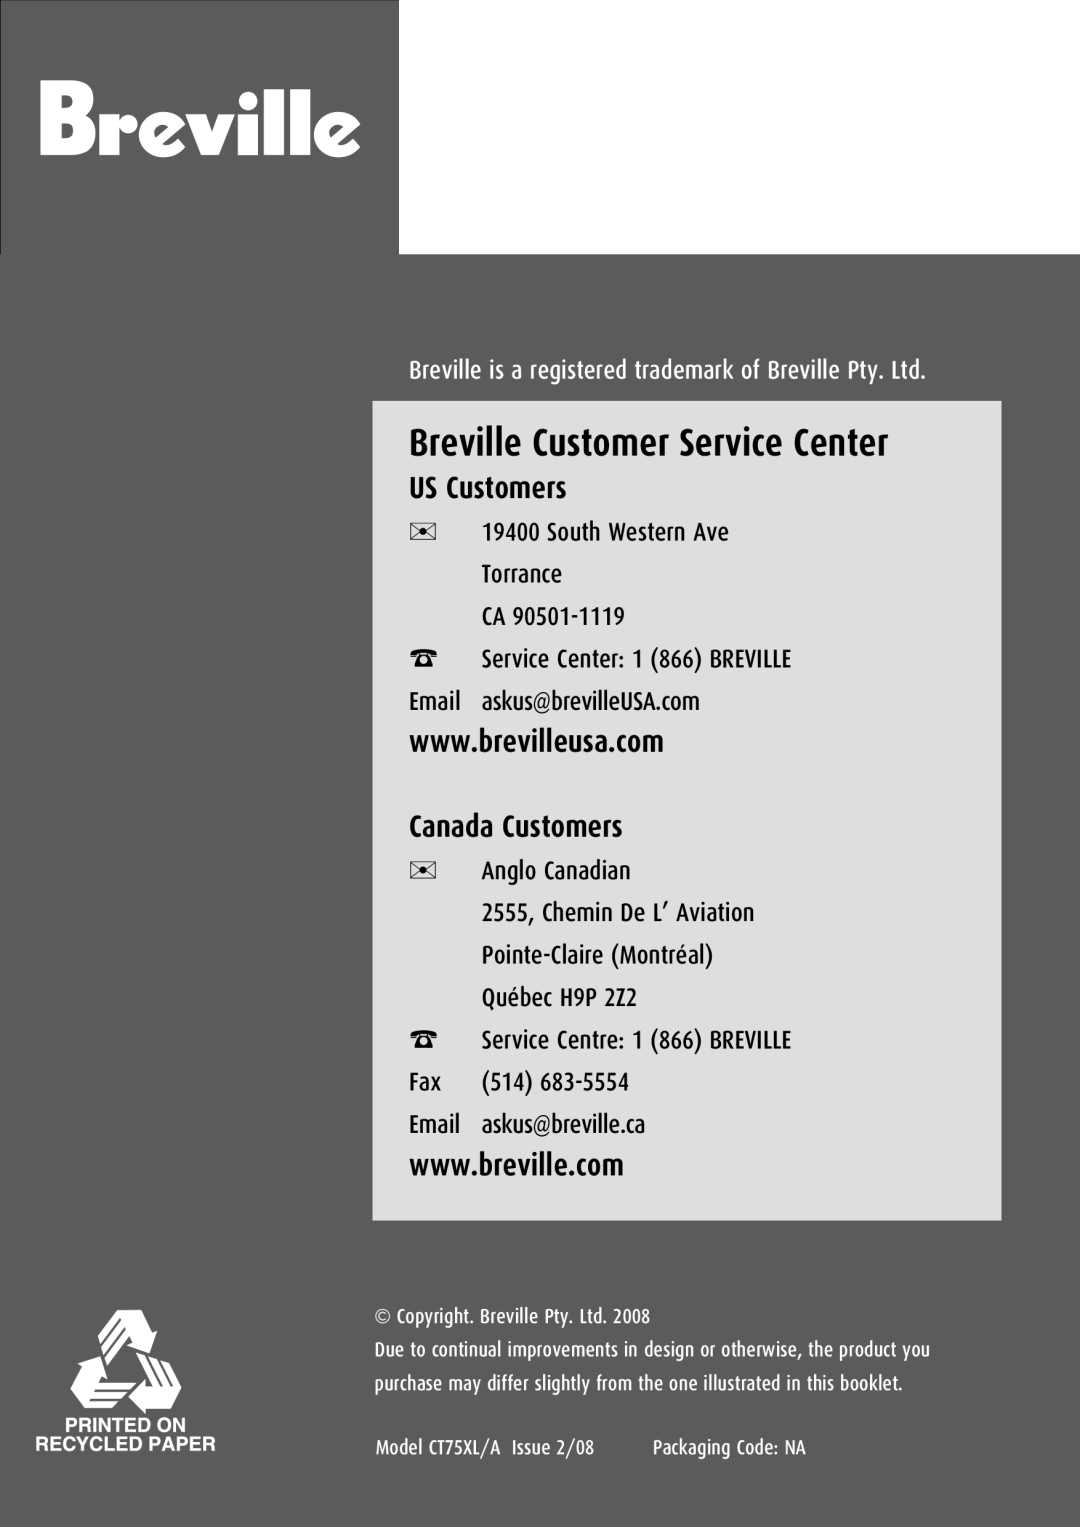 Breville CT75XL/A manual Breville Customer Service Center, US Customers, Canada Customers, Anglo Canadian 